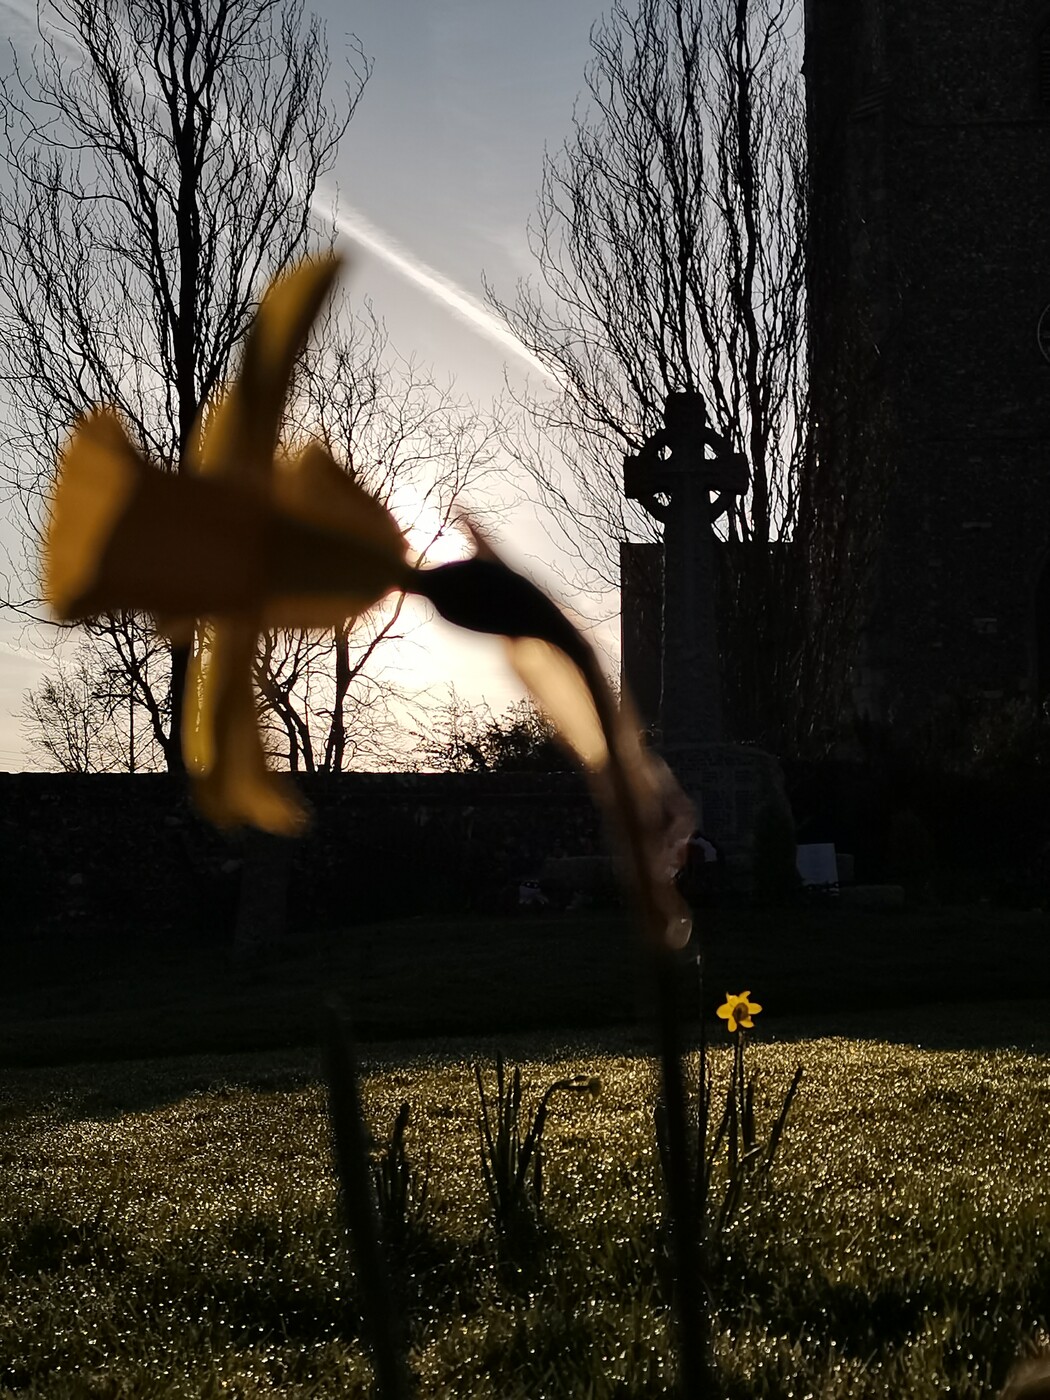 photographer KentTog outdoors  photo. catching the first rays in the churchyard .